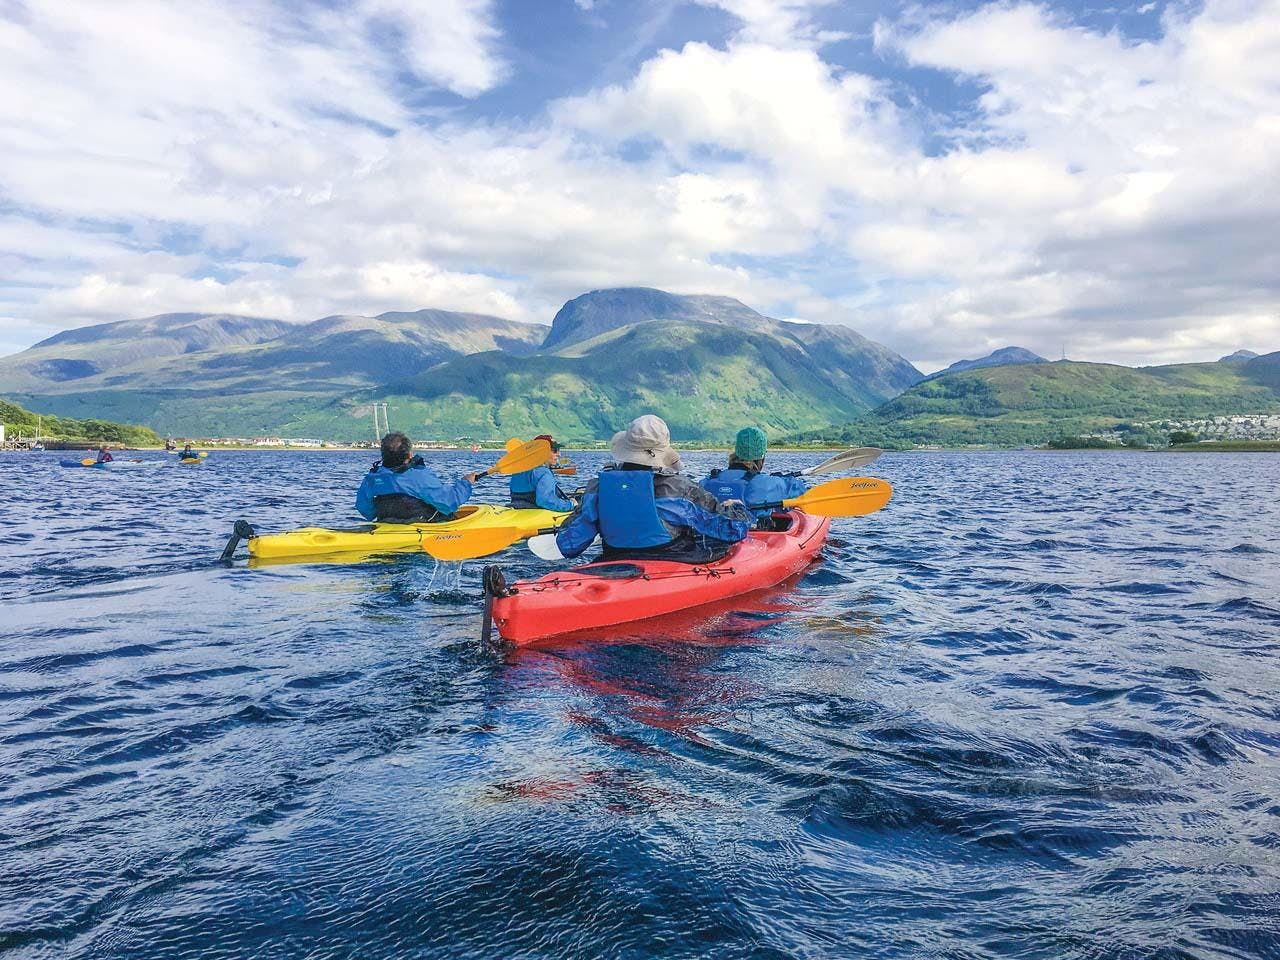 Guests explore by kayak in Scotland.